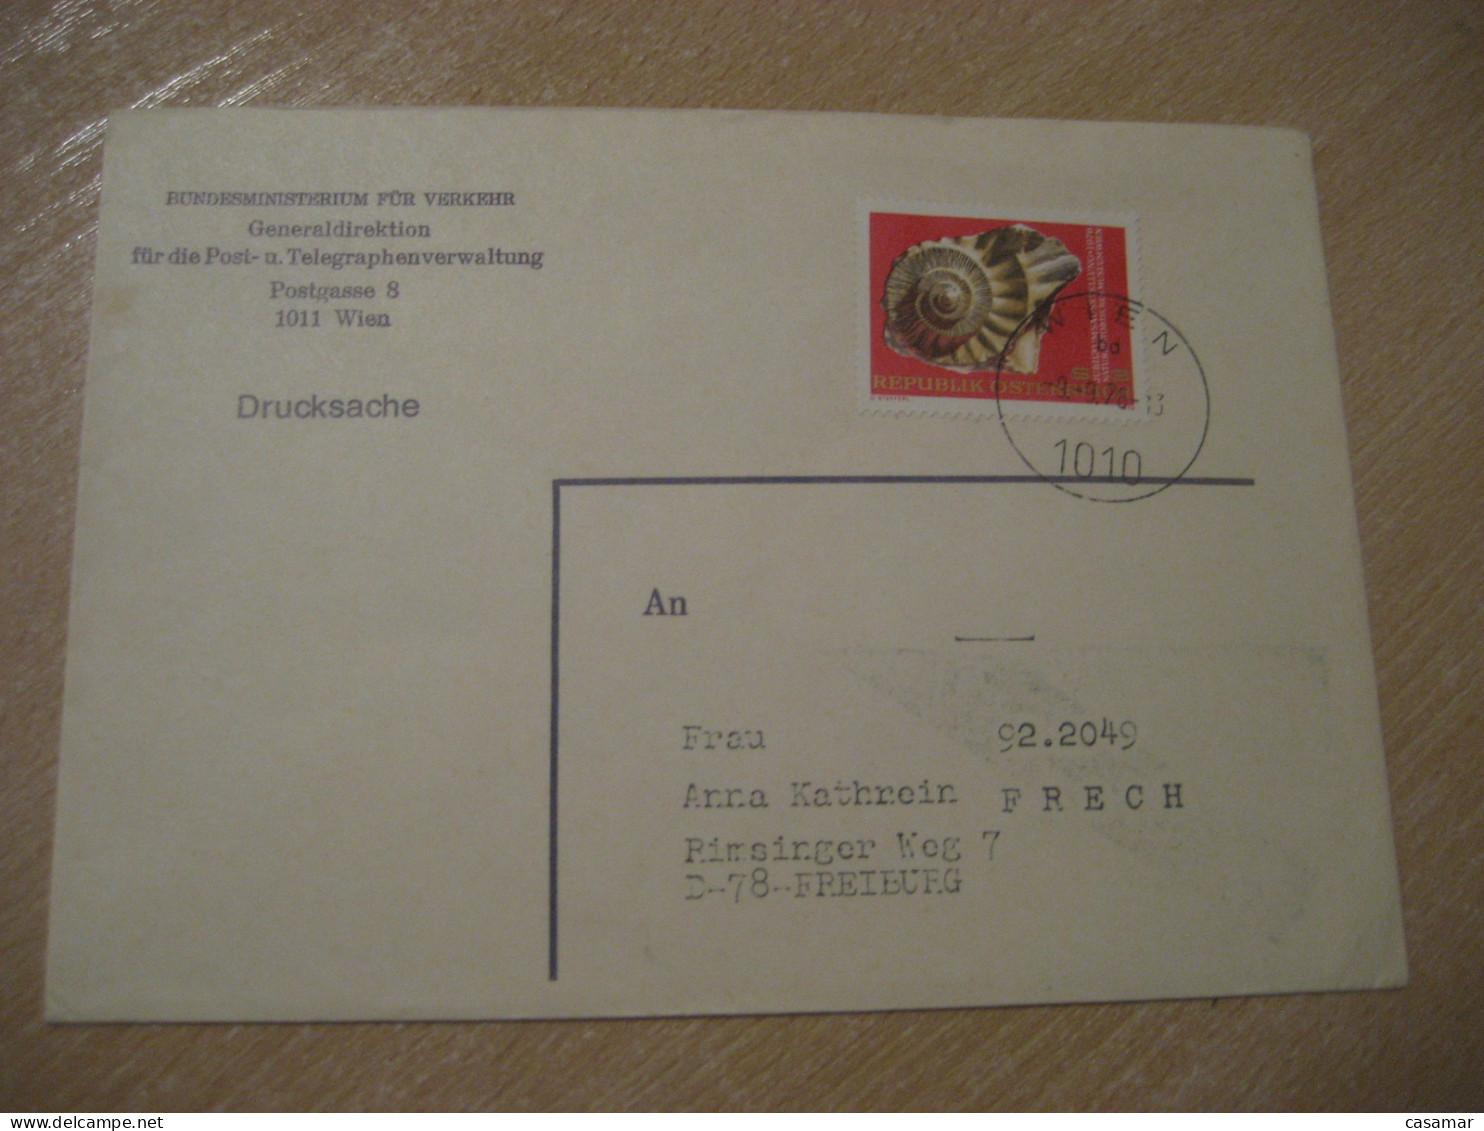 WIEN 1976 Freiburg Ammonite Mollusc Natural History Museum Cancel Cover AUSTRIA Fossil Fossils Animals Fossiles Geology - Fossielen